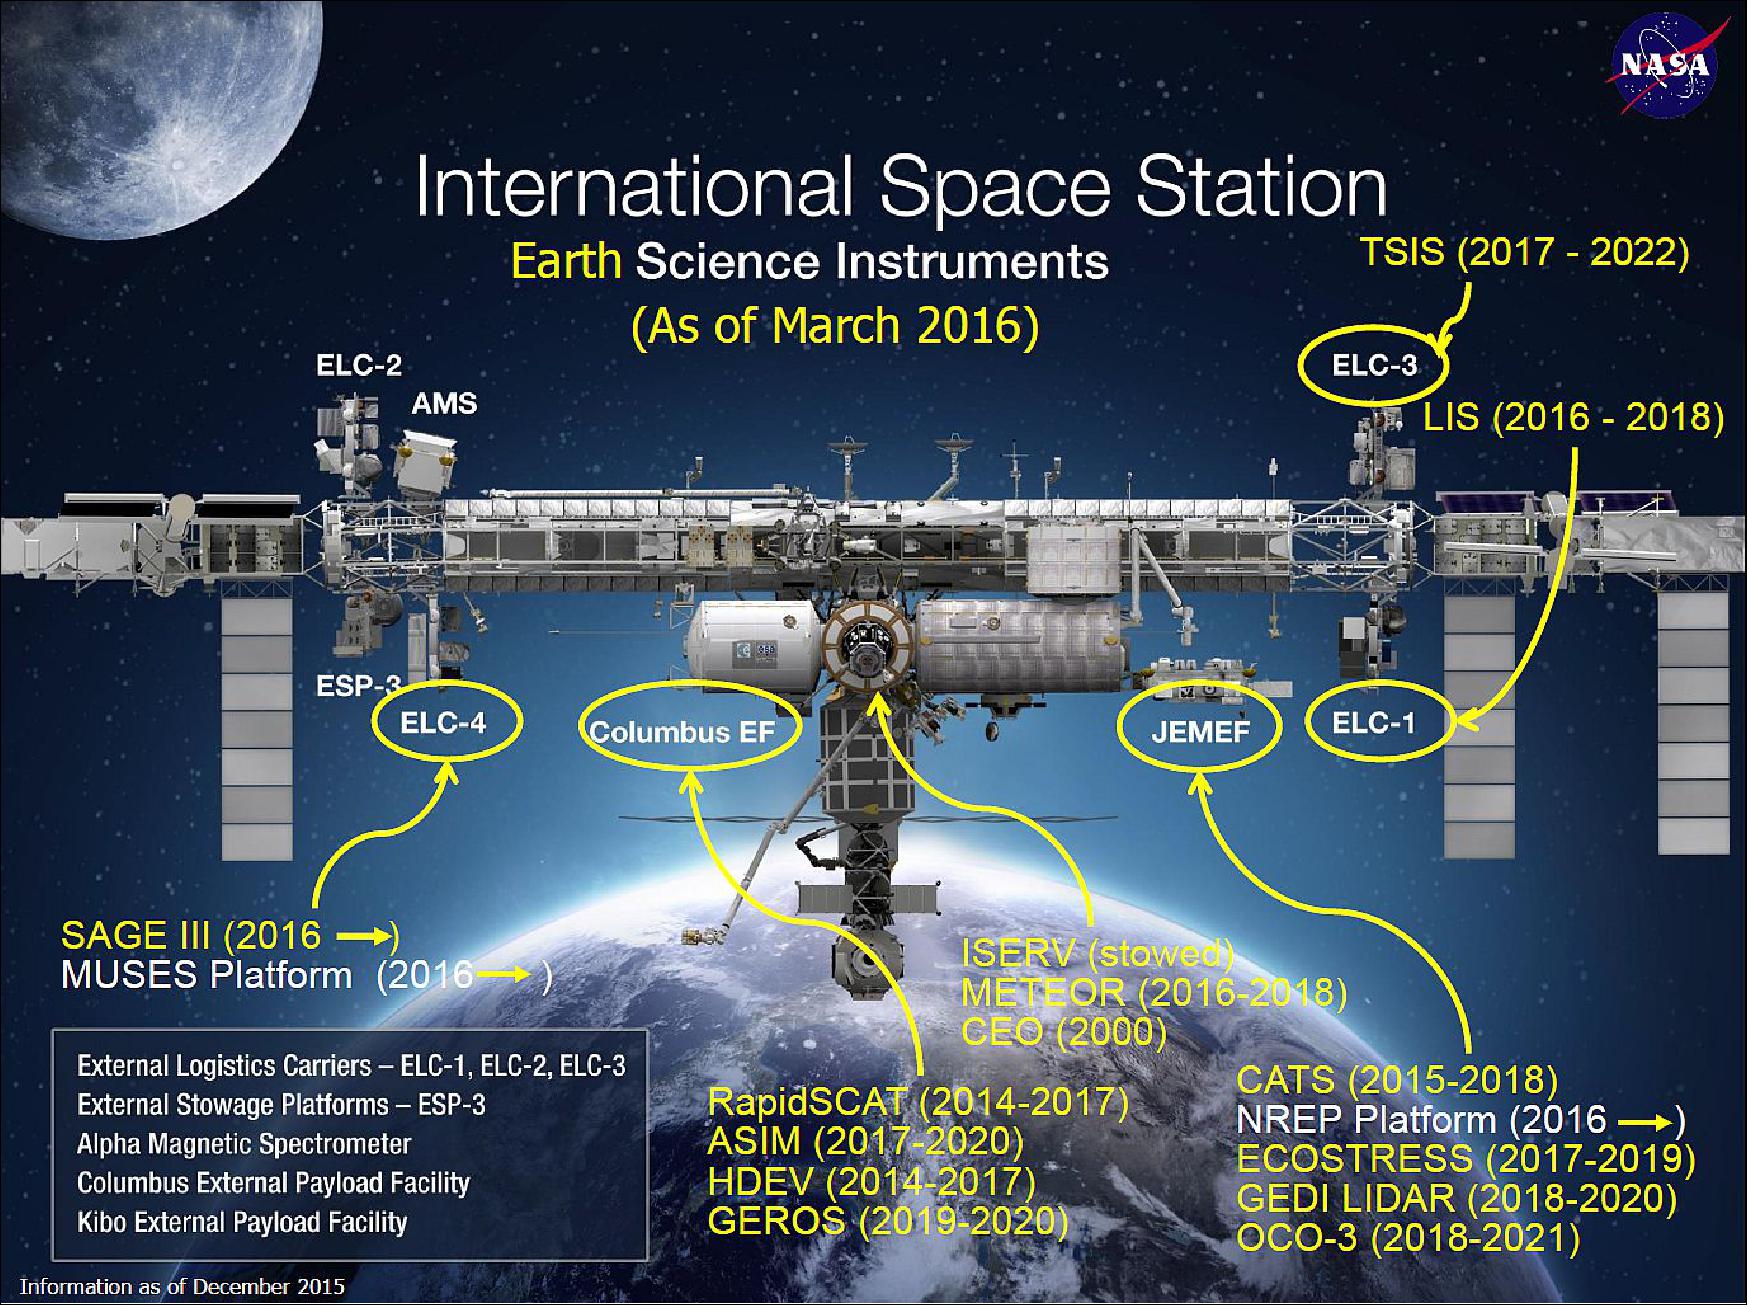 Figure 1: Overview of Earth science instruments on the ISS (installed or planned) in the second decade of the 21st century (image credit: NASA) 3)